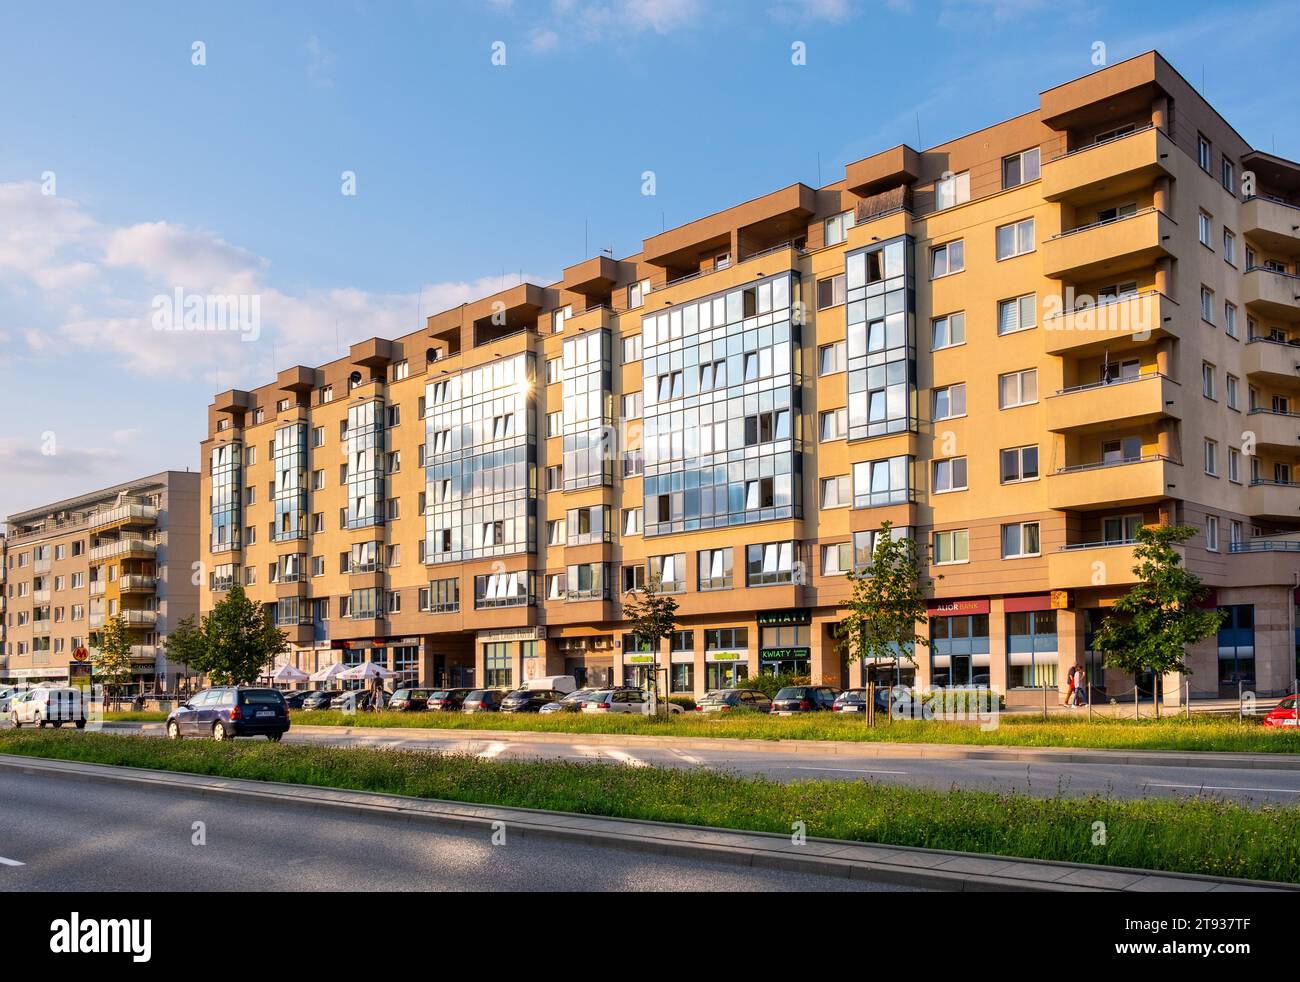 Warsaw, Poland - July 11, 2021: Modern residential buildings aside metro station at KEN and Wawozowa street in Kabaty quarter of Ursynow district Stock Photo